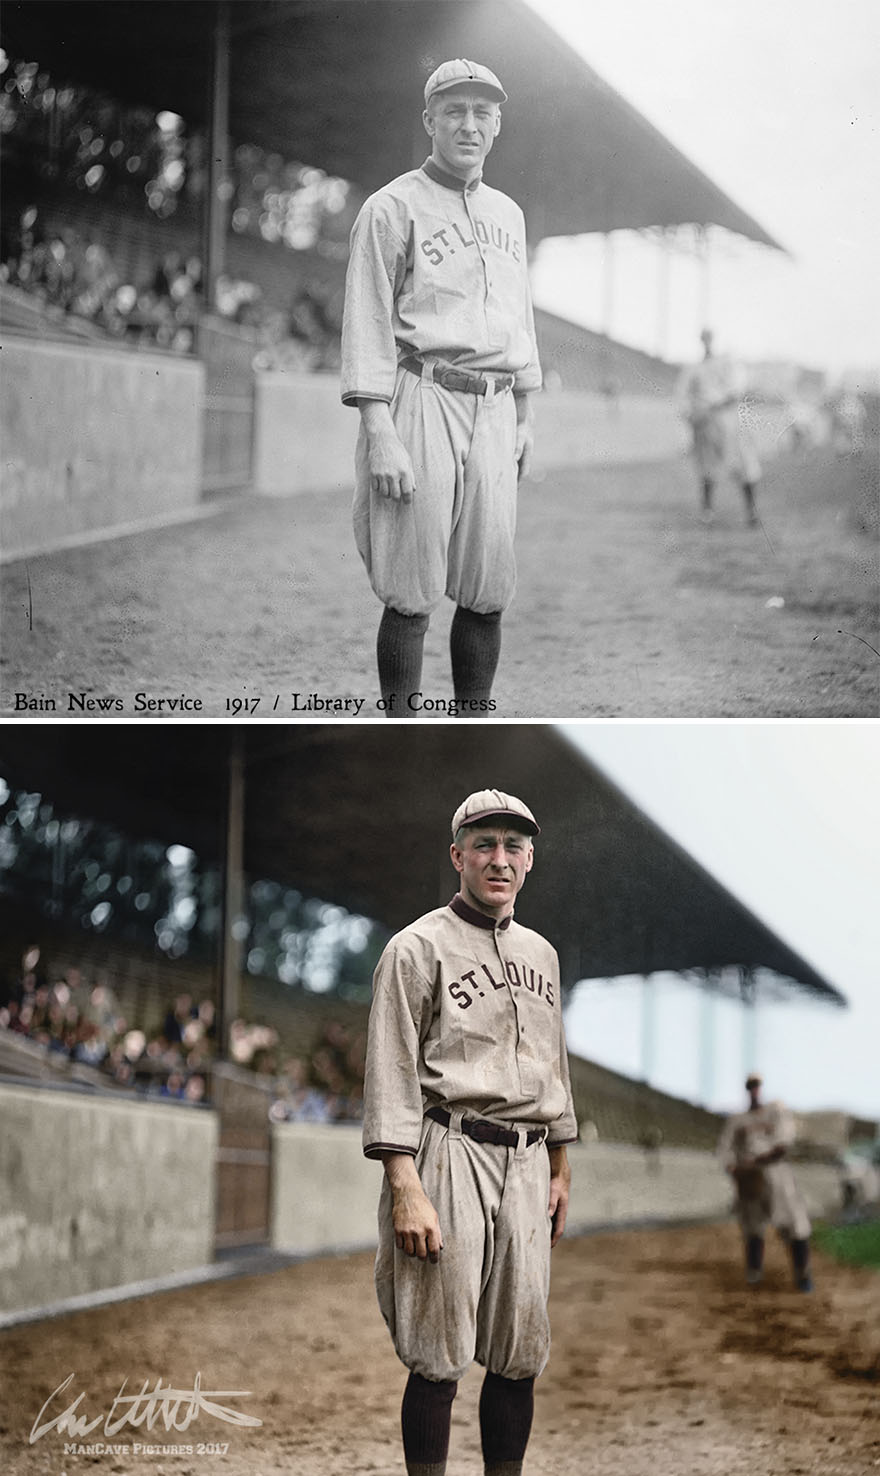 Branch Rickey. St. Louis Browns, 1914. Rickey Was No Great Player, But He Lives In Baseball History For His Work In Breaking The Segregation Of The Major Leagues, When He Signed Jackie Robinson To The Dodgers In 1947